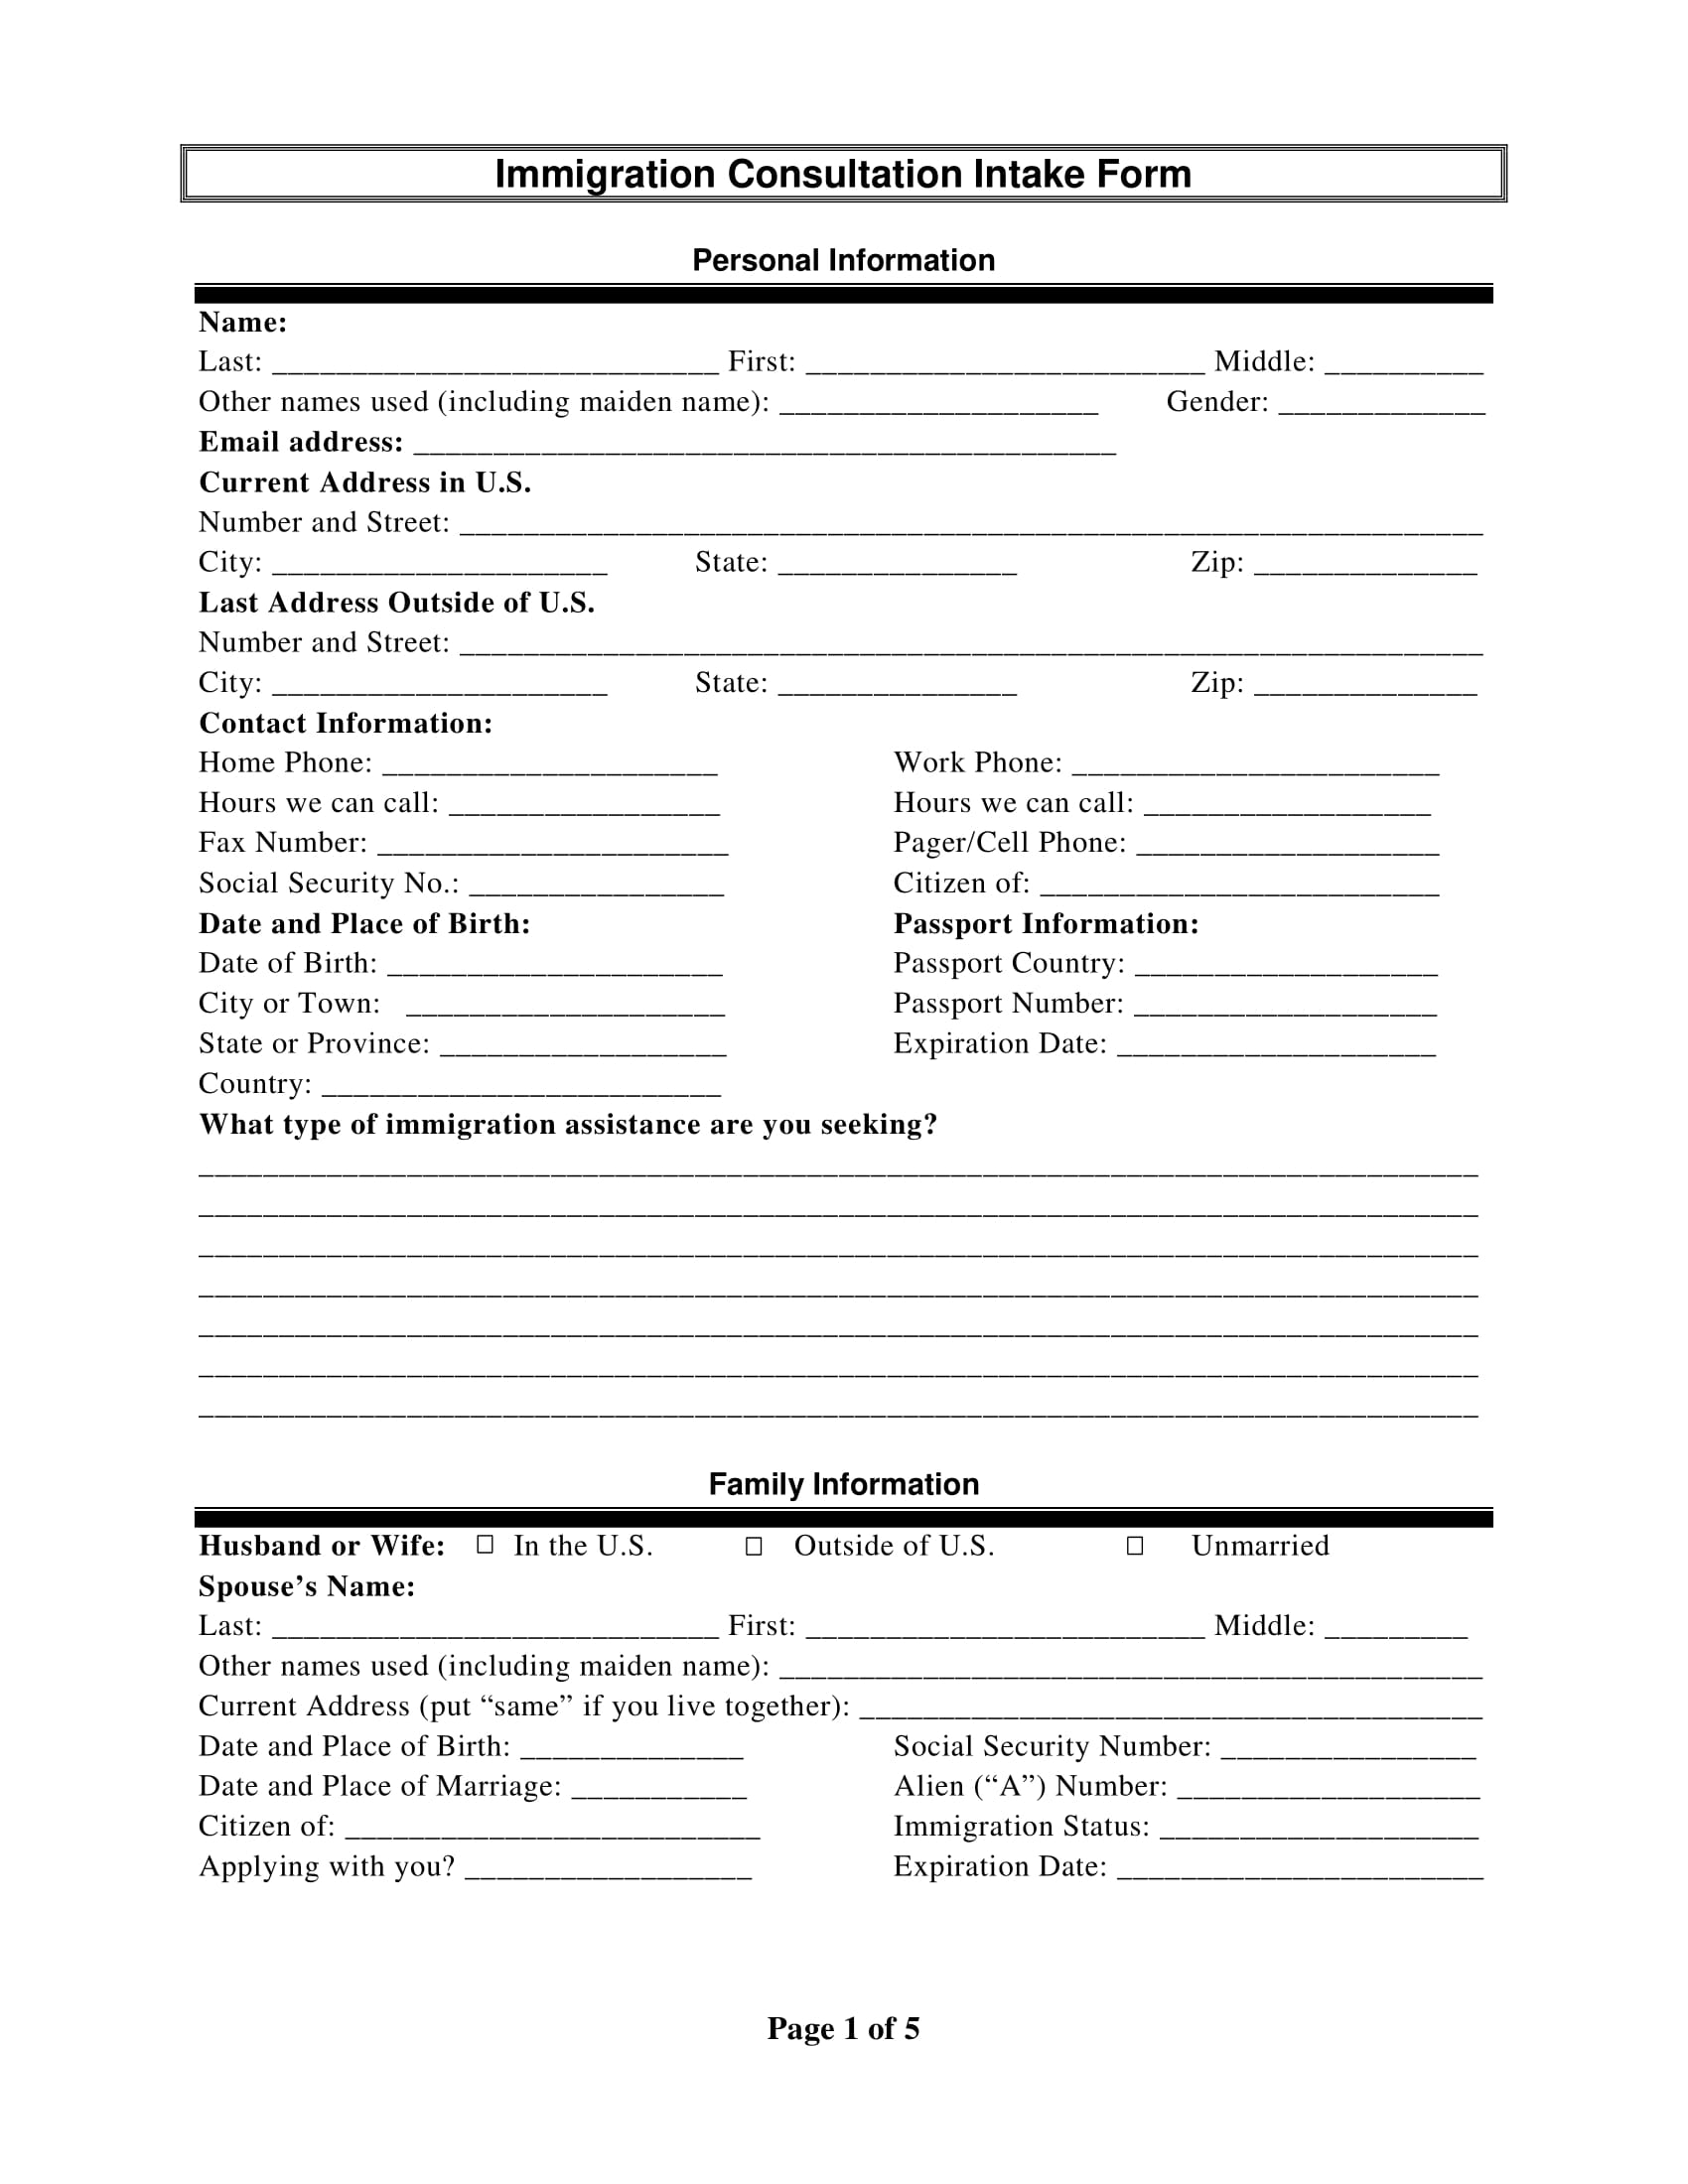 immigration consultation intake form 1